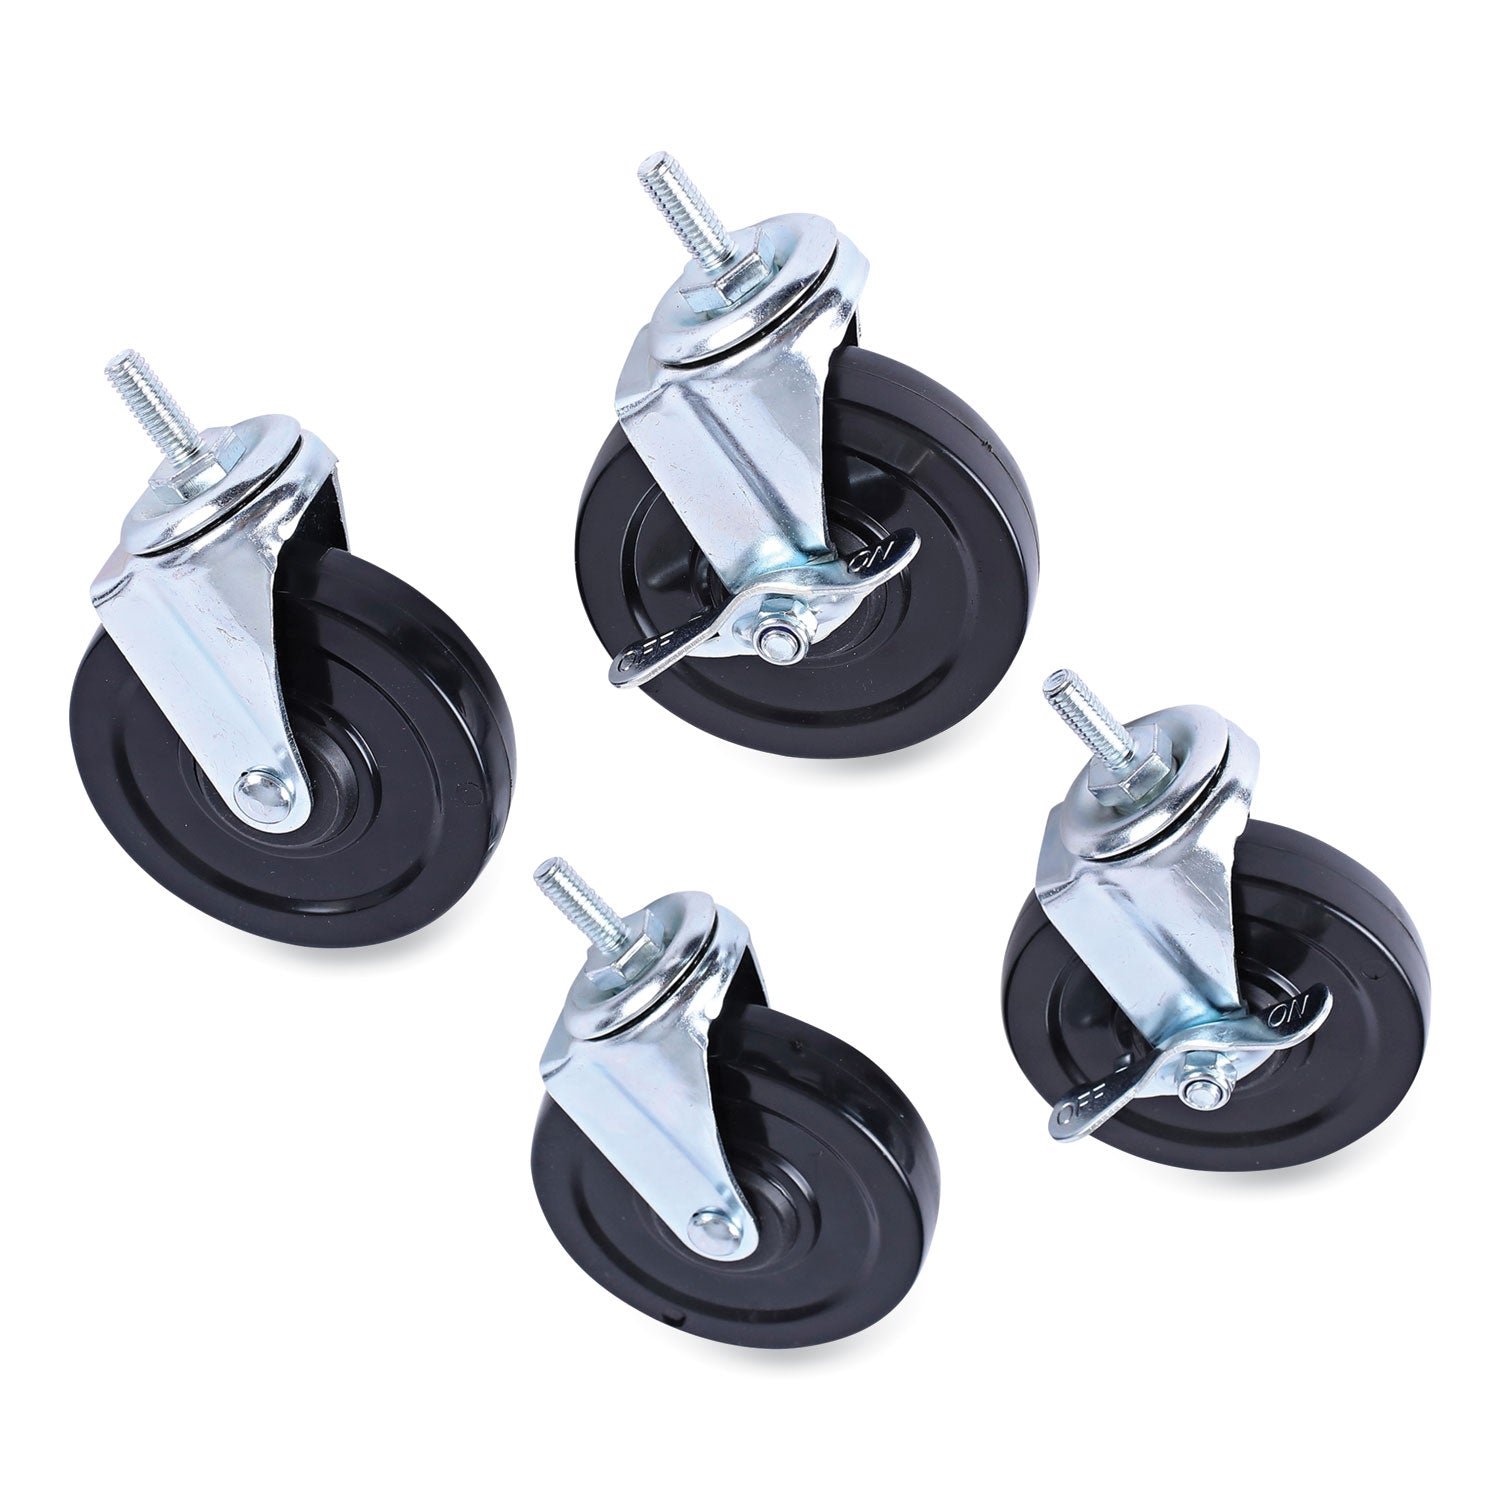 optional-casters-for-wire-shelving-grip-ring-type-k-stem-4-wheel-black-silver-4-set-2-locking_alesw690004 - 1